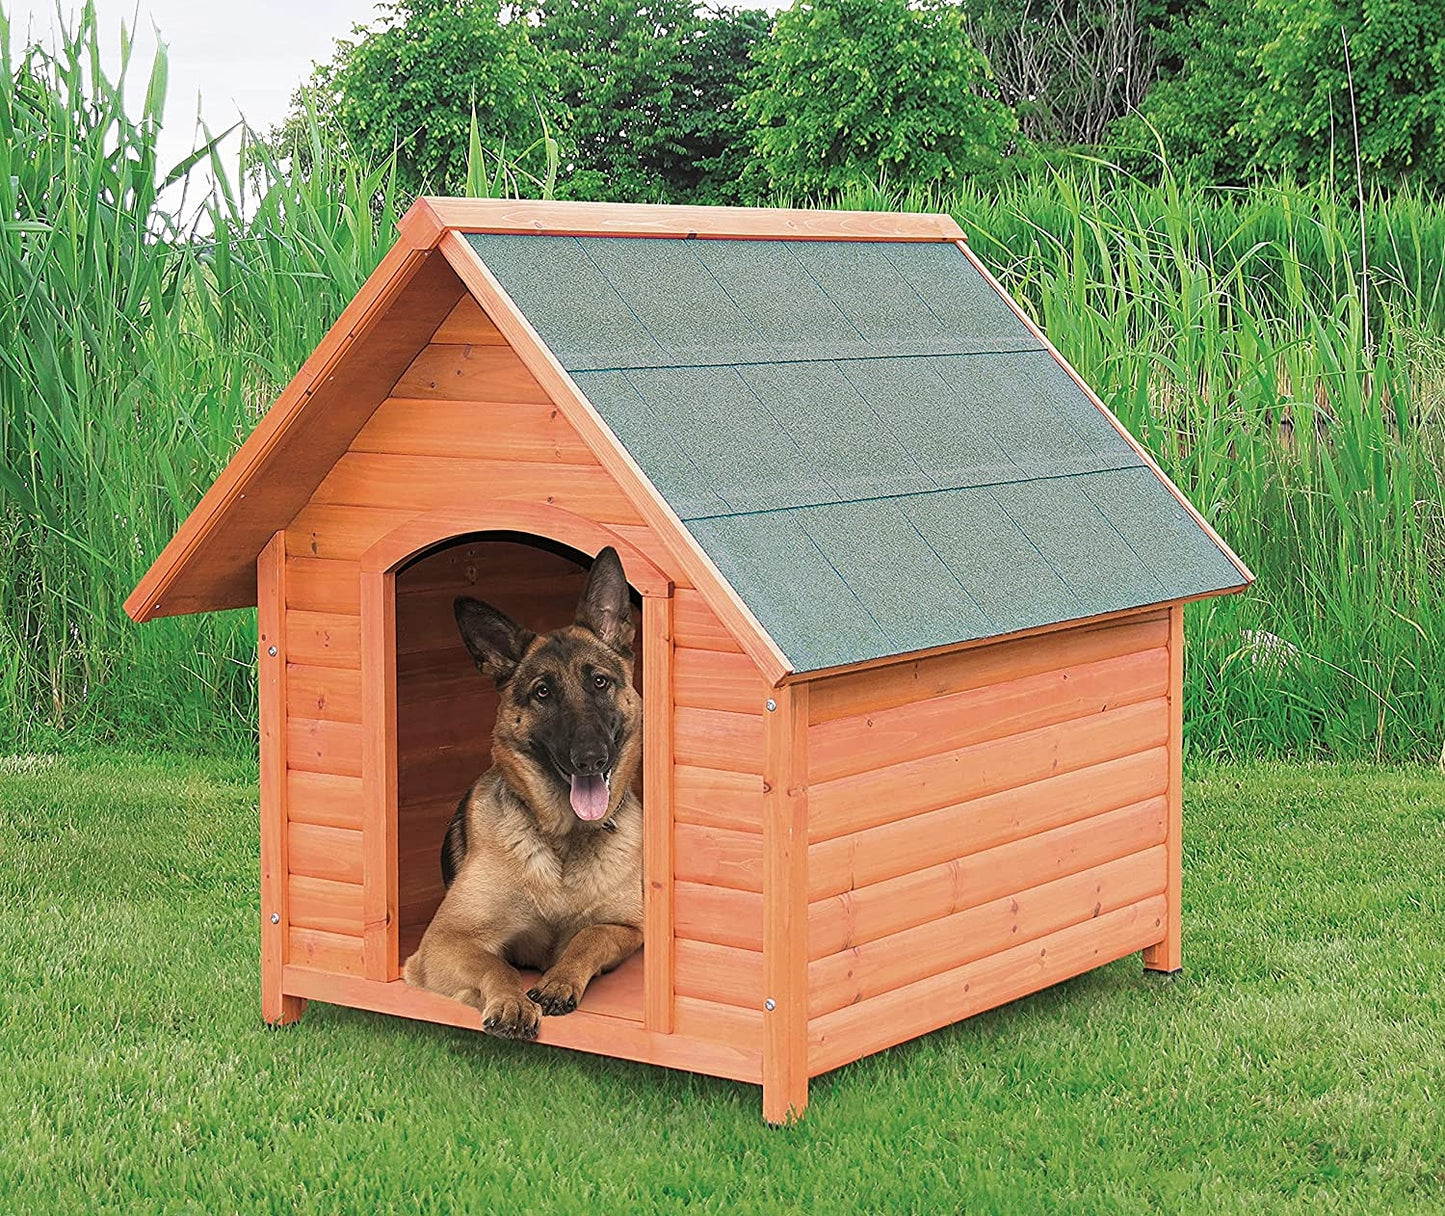 Natura Cottage Doghouse S, M, L, XL outdoor wooden doghouse.